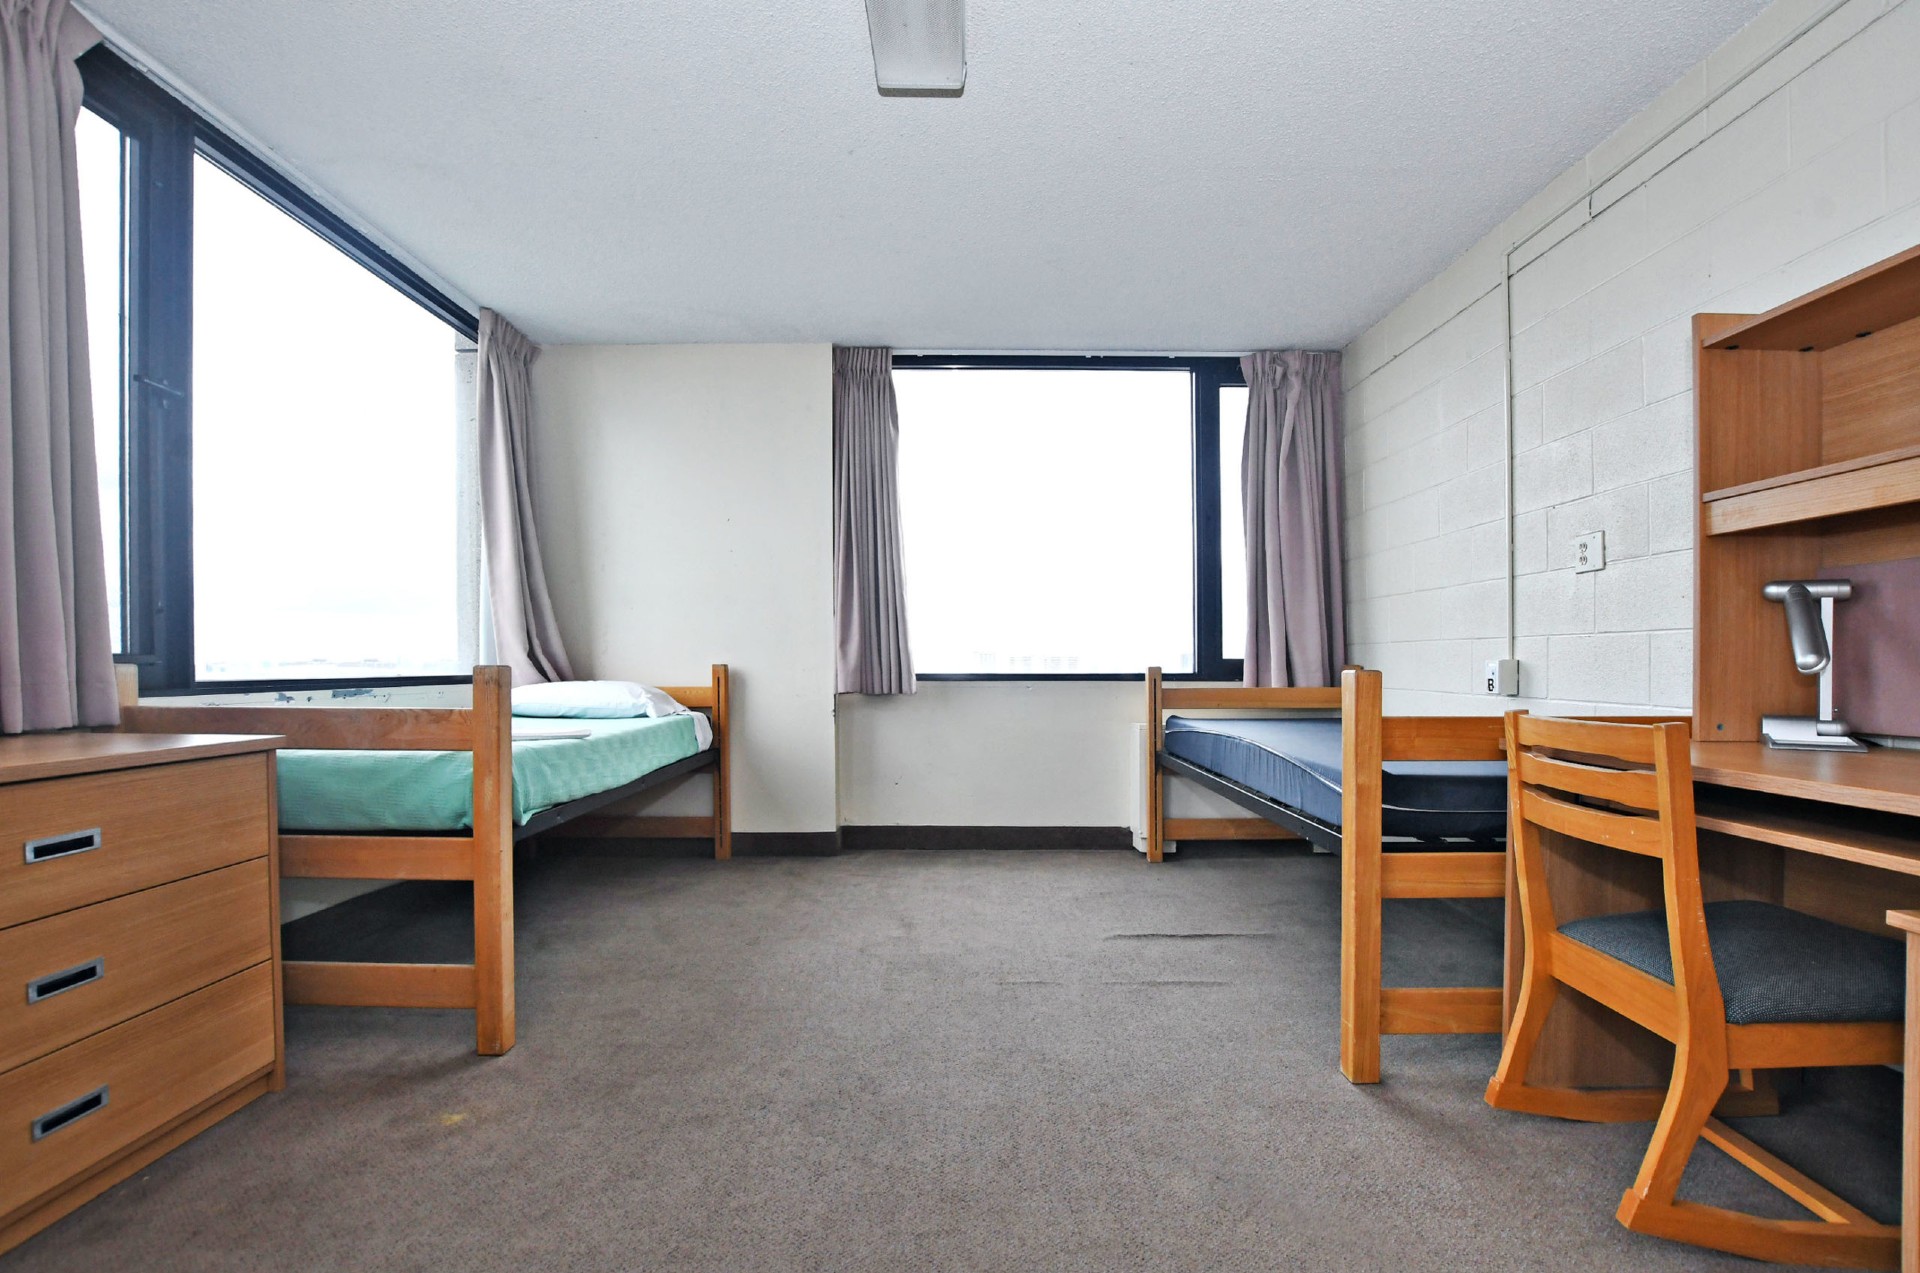 Picture of a double room in Bethune building. Two windows, two beds, a desk and a dresser.